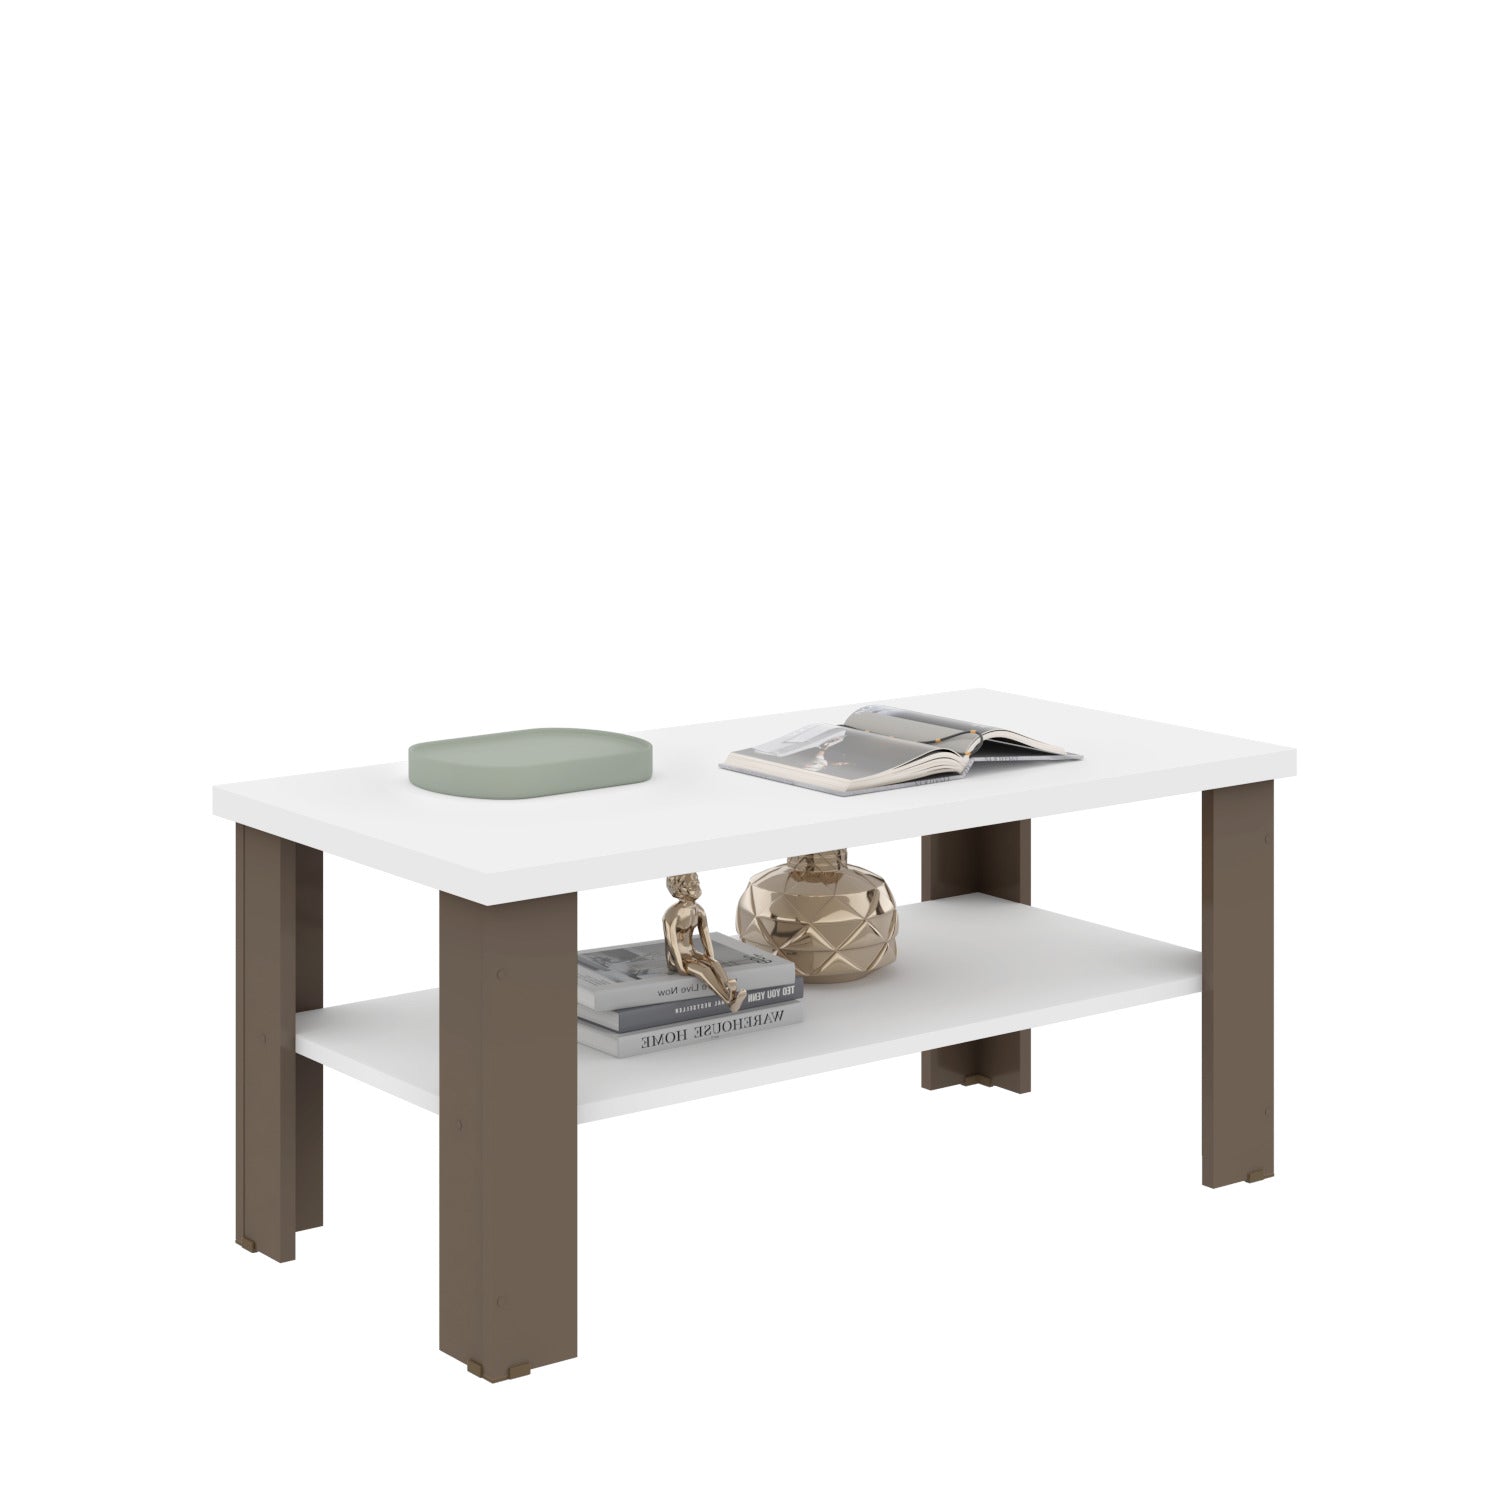 35" White And Light Gray Coffee Table With Shelf